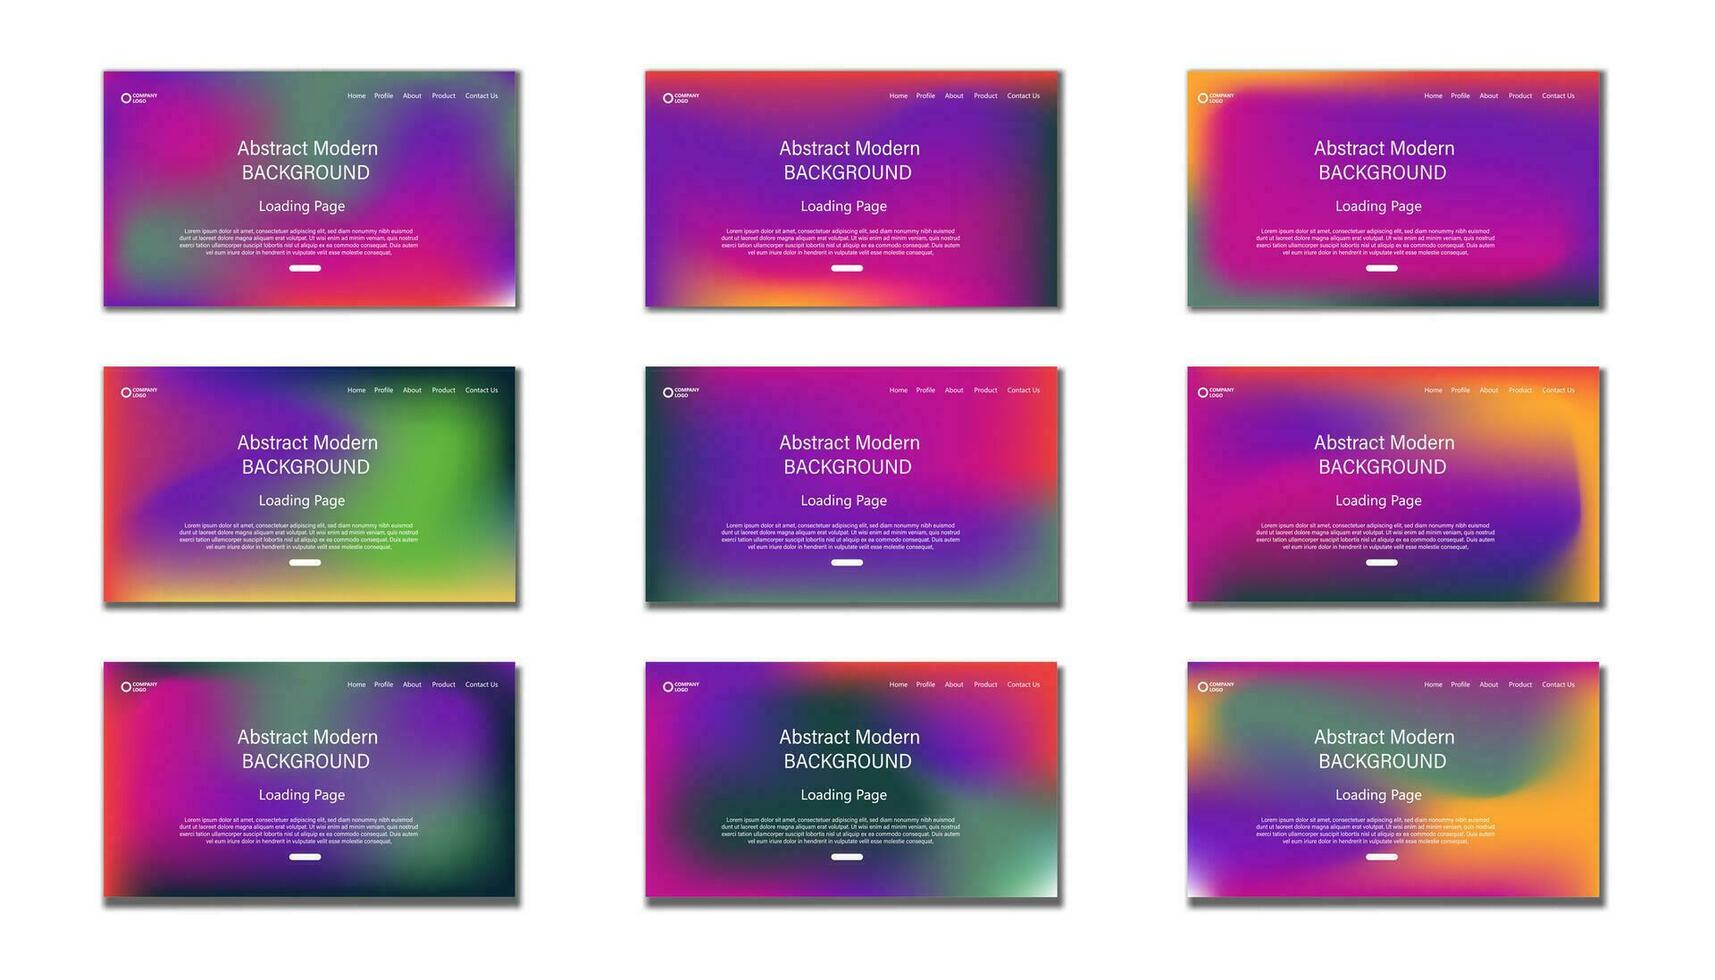 Set of Sign Up and Sign In forms. Colorful gradient. gradient uiux loading page, Registration and login forms page. Professional web design, gradient background, gradient mash modern background vector